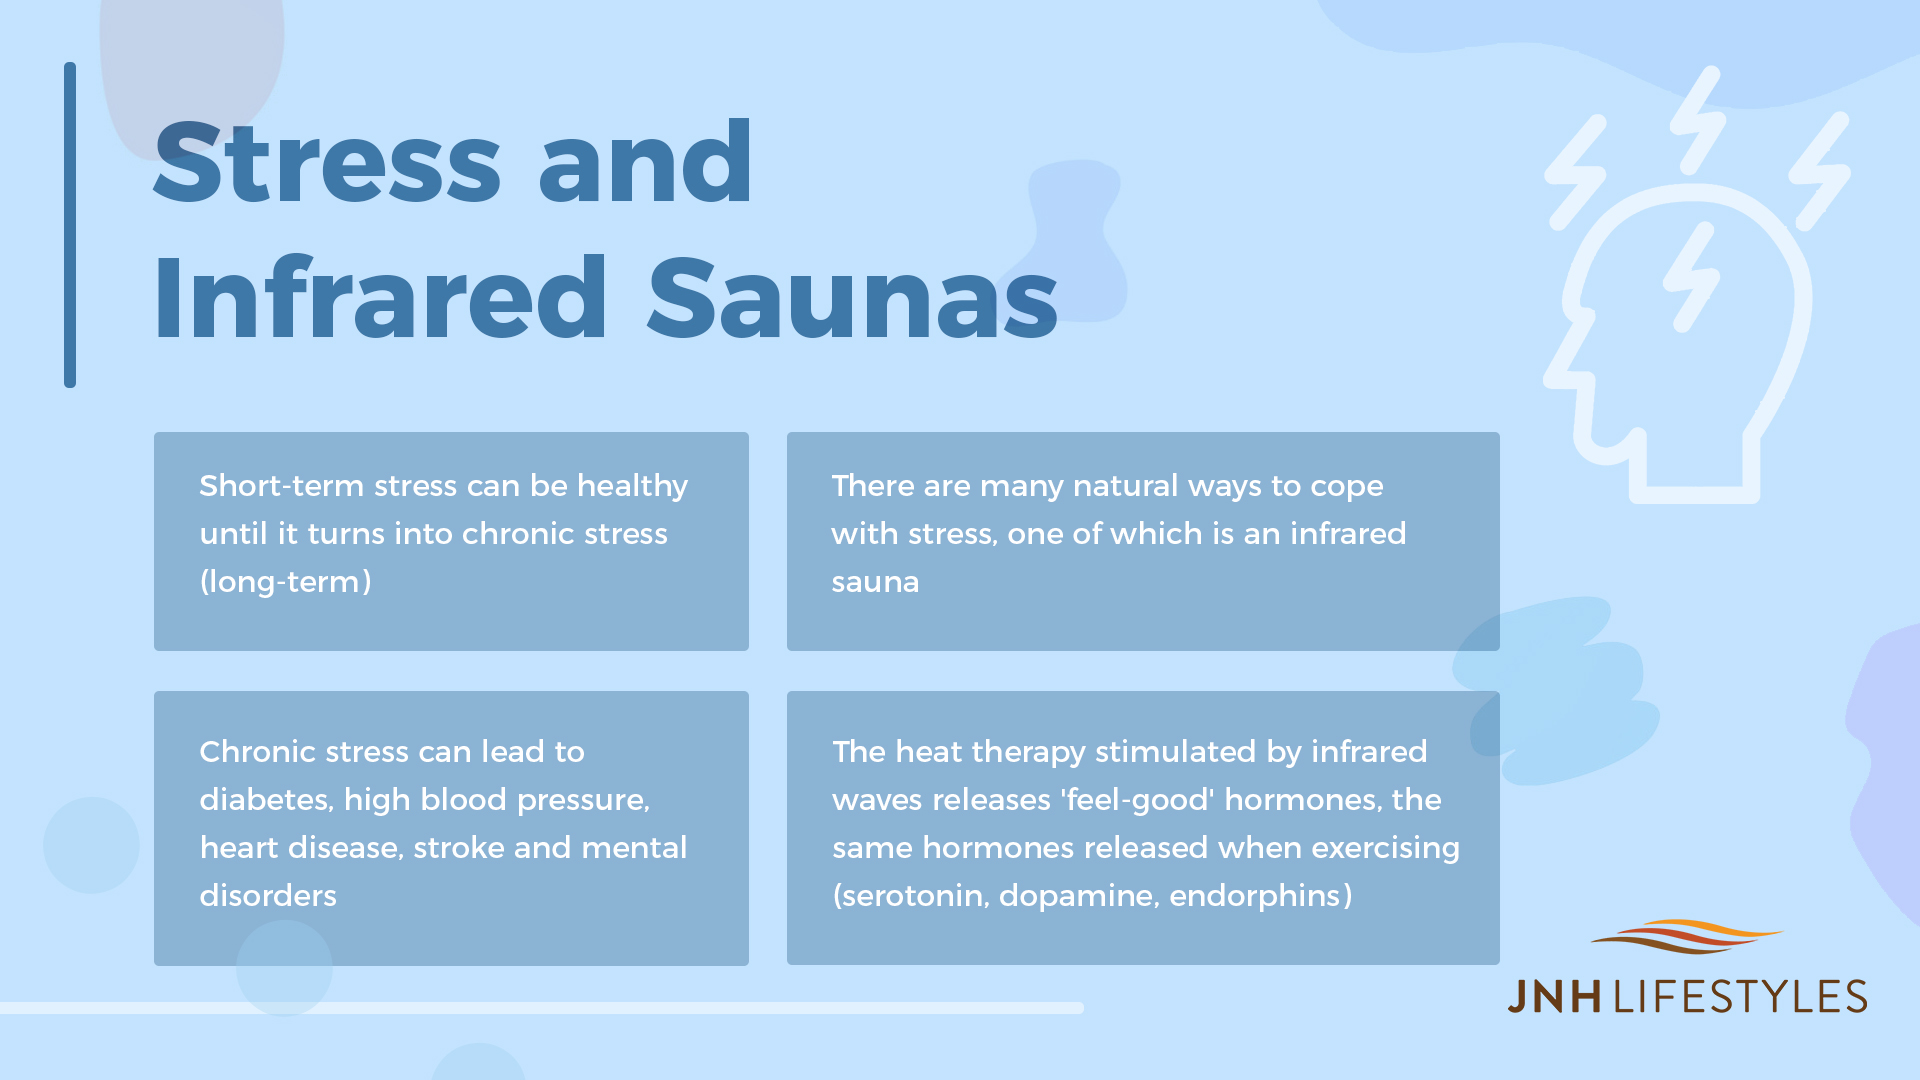 Stress and Infrared Saunas -Short-term stress can be healthy until it turns into chronic stress (long-term) -Chronic stress can lead to diabetes, high blood pressure, heart disease, stroke and mental disorders -There are many natural ways to cope with stress, one of which is an infrared sauna -The heat therapy stimulated by infrared waves releases 'feel-good' hormones, the same hormones released when exercising (serotonin, dopamine, endorphins)